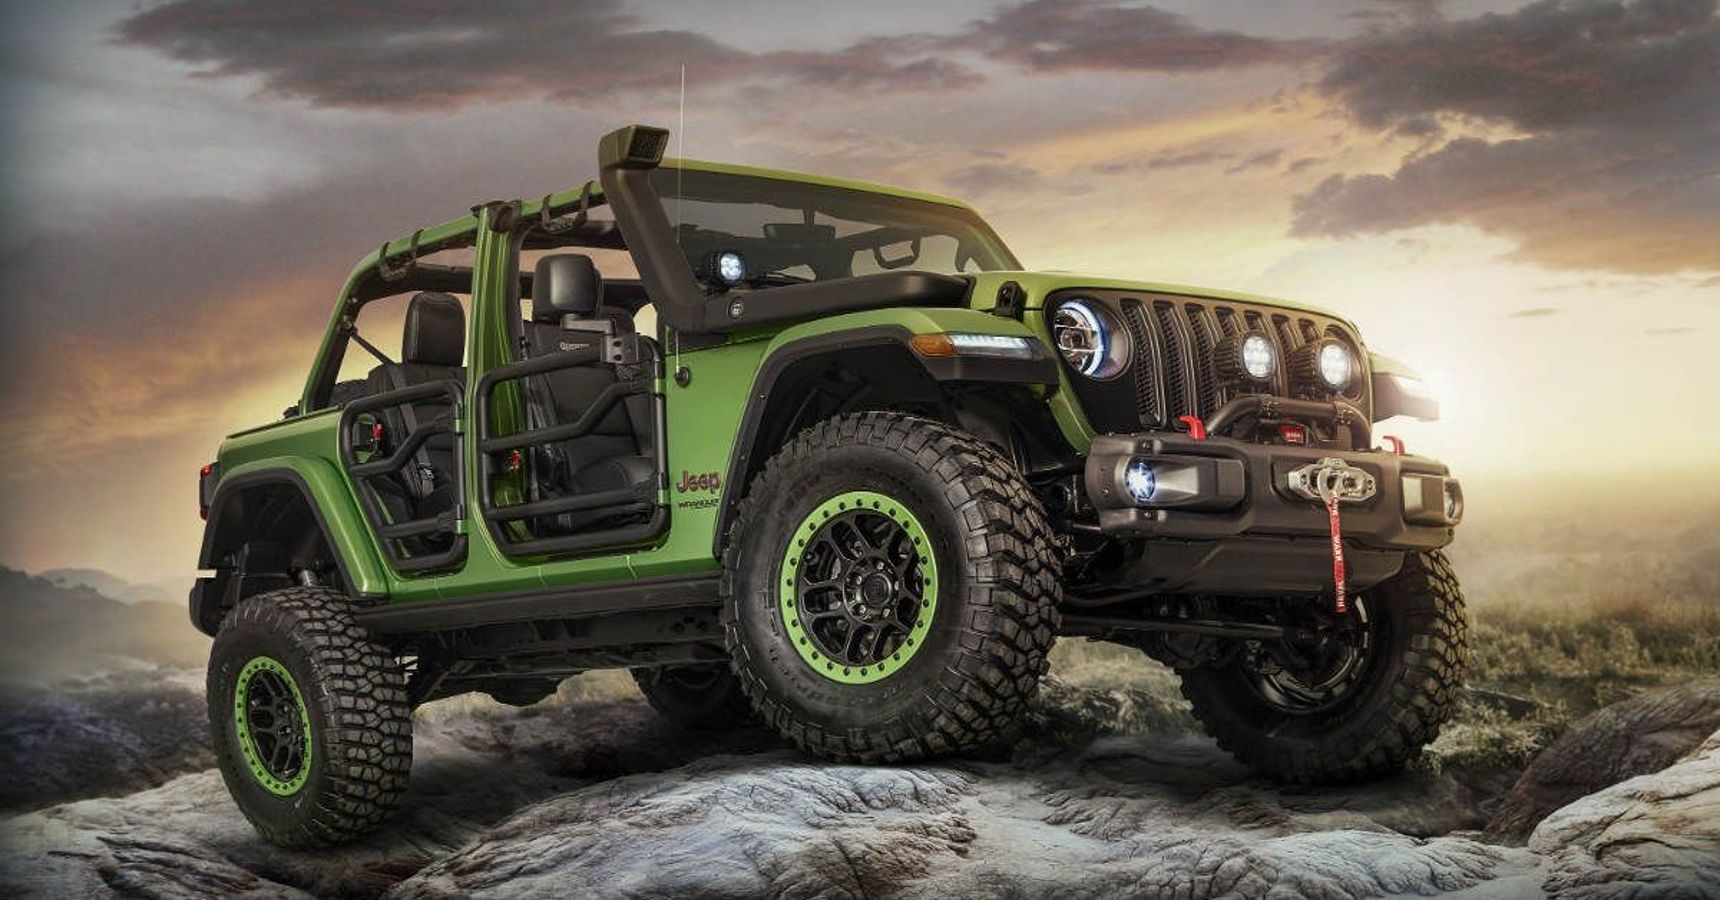 These Are The Best Aftermarket Parts To Buy For Your Jeep Wrangler